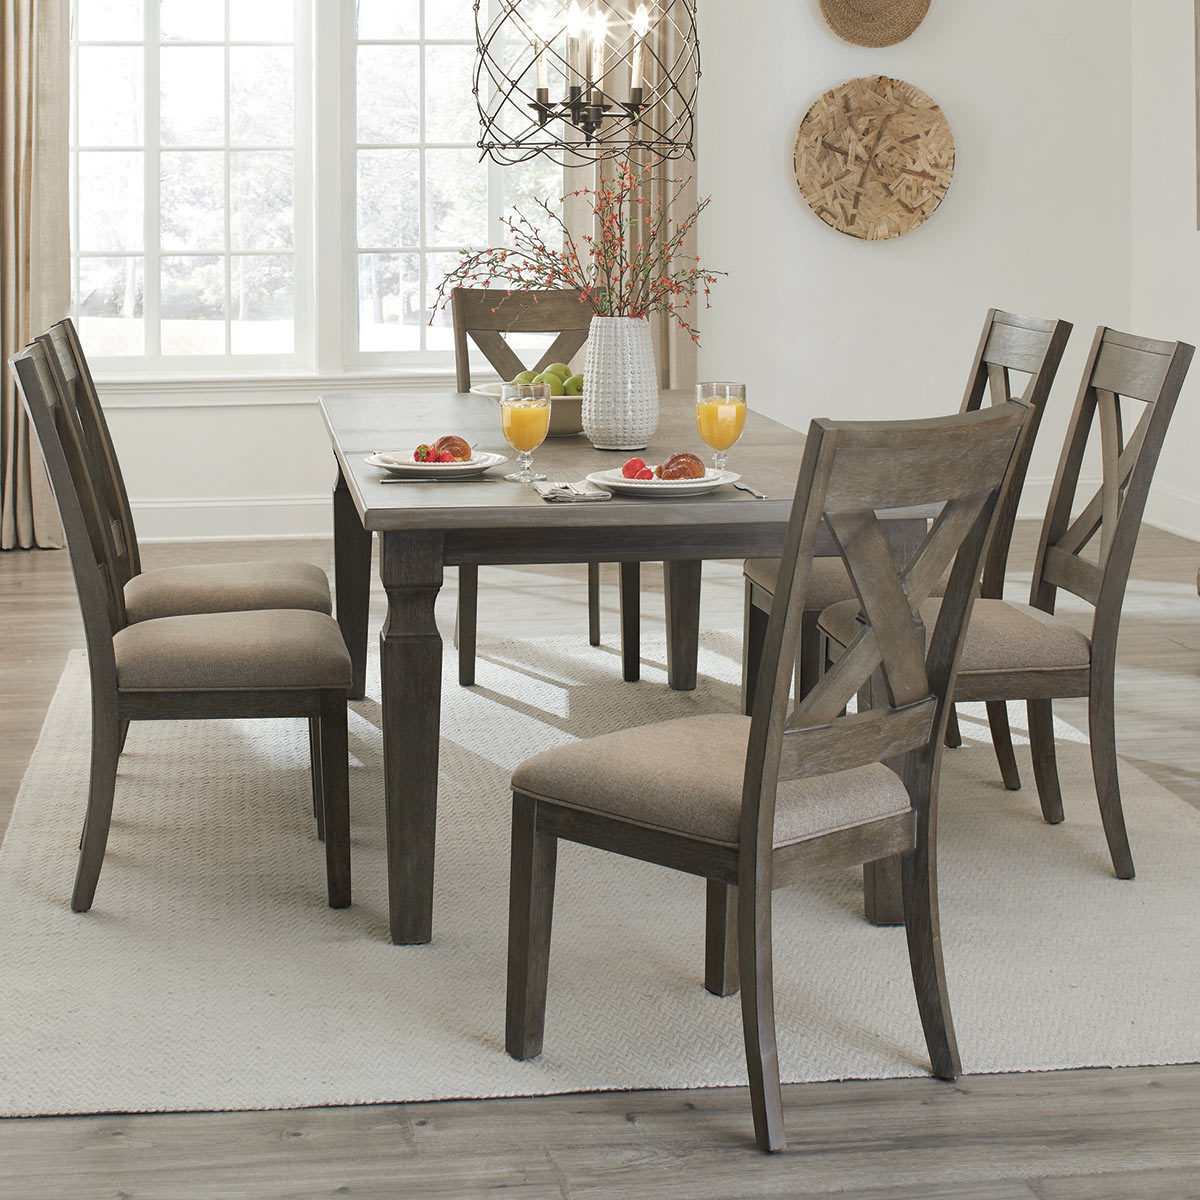 Universal Furniture Eileen Extending Dining Room Table 6 Chairs